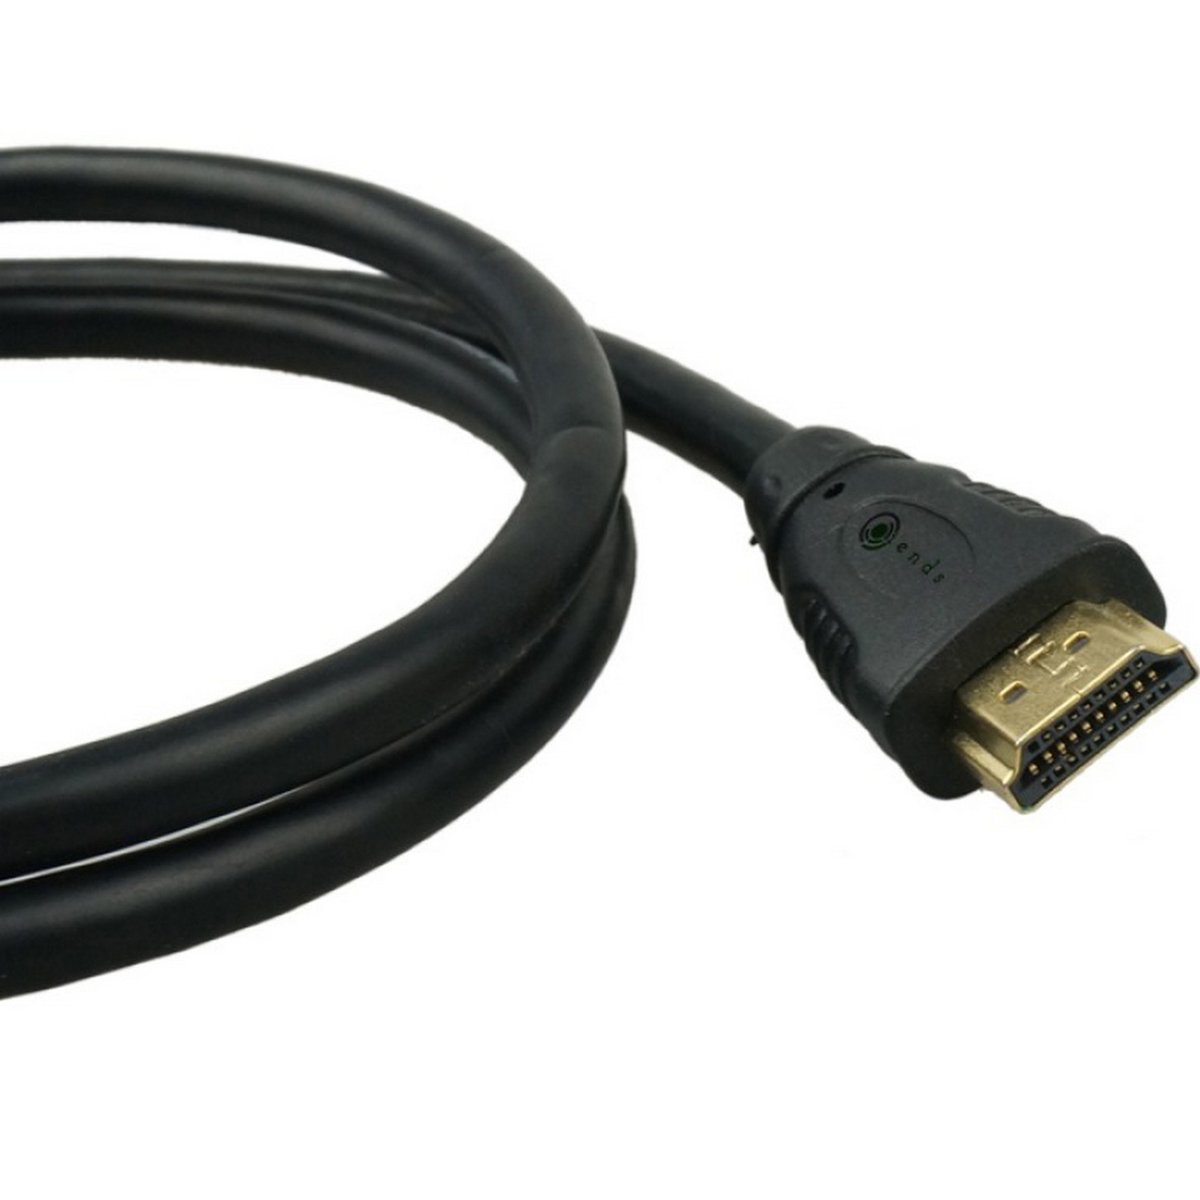 Iends HDMI Cable IE-CA8838 2Meter